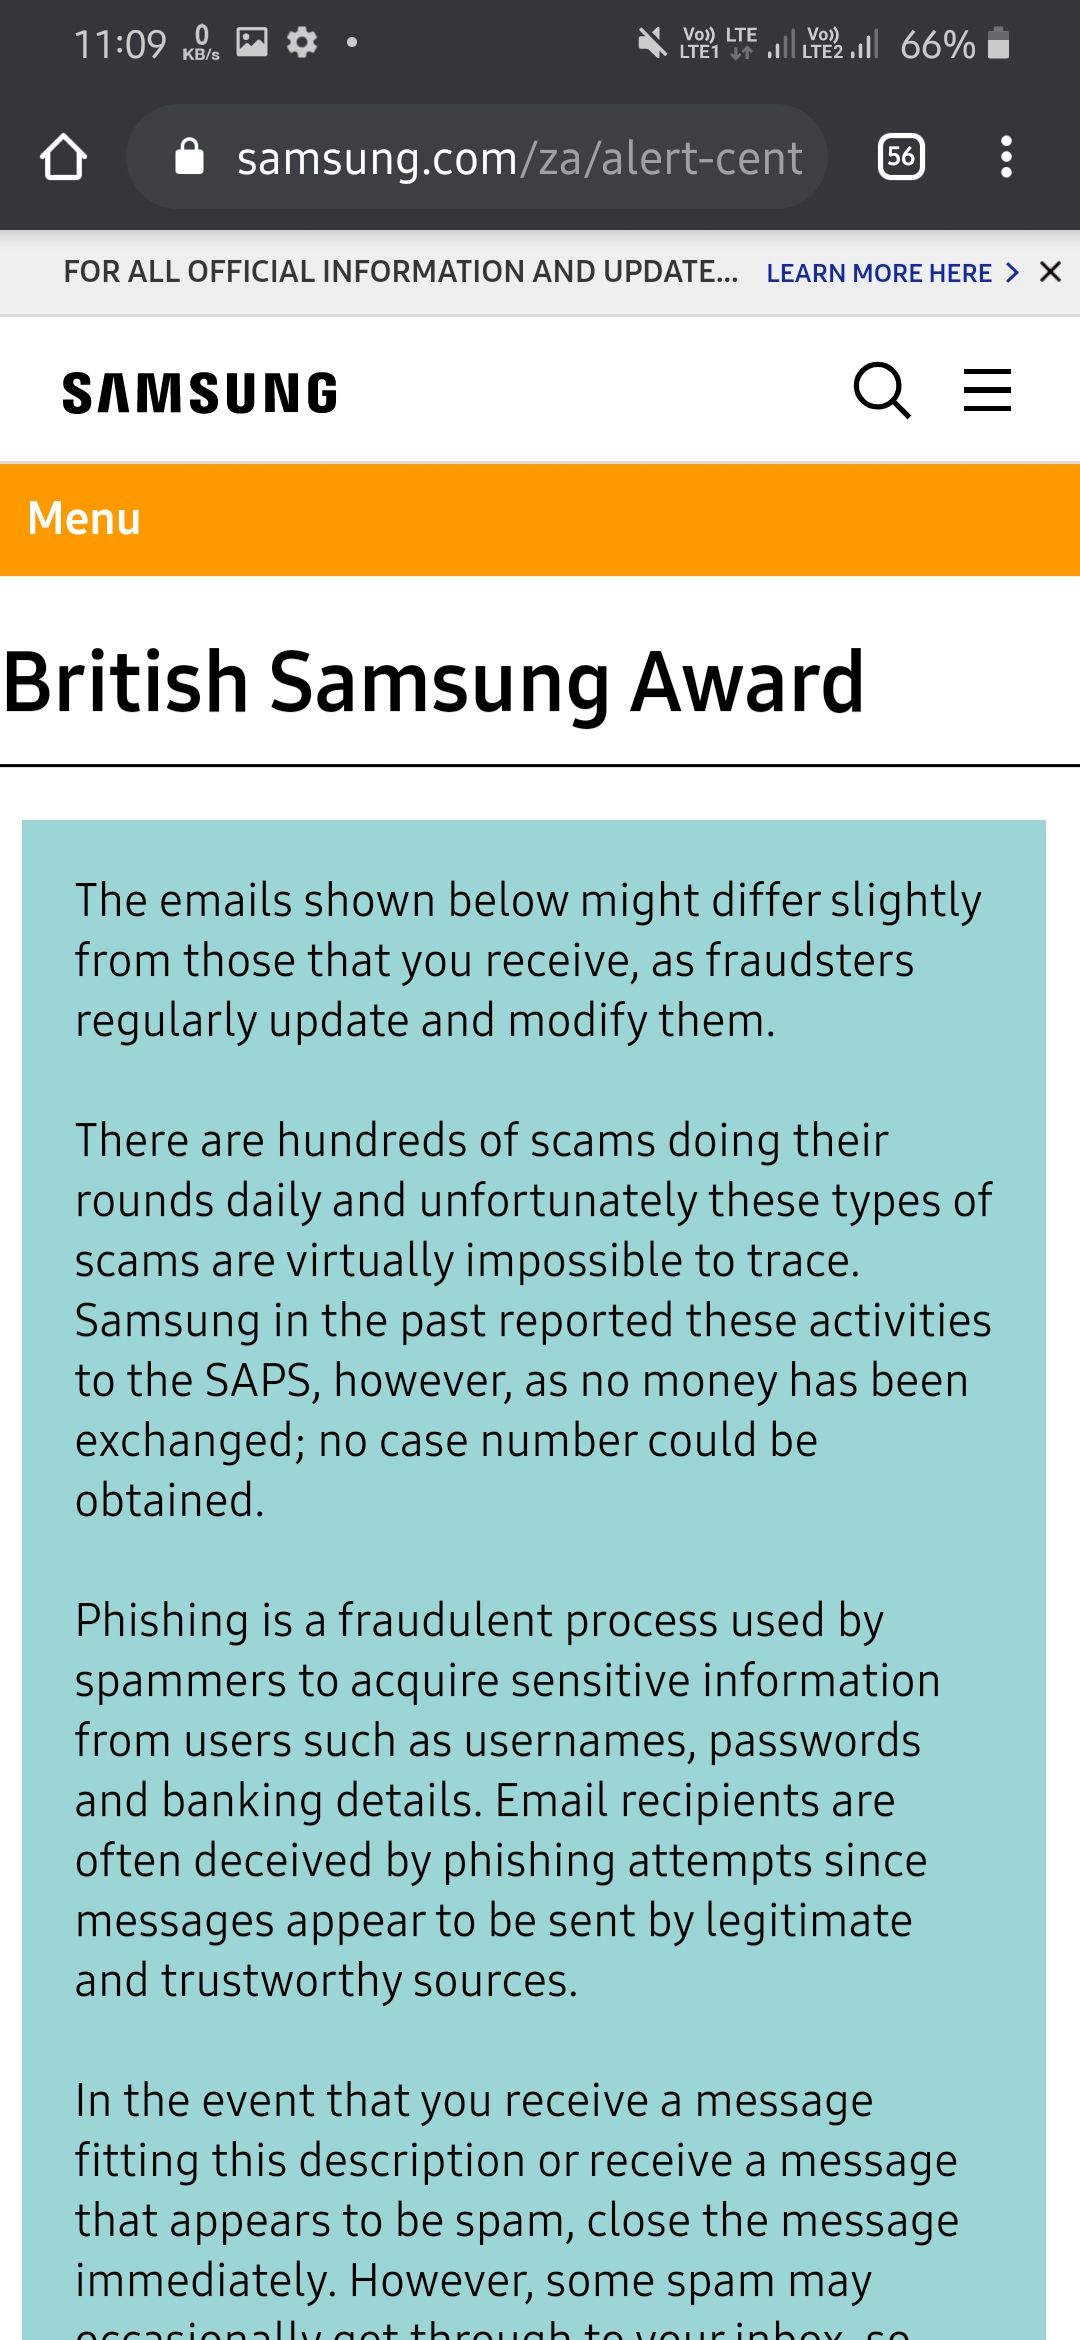 Another False information from Sammobile! - Samsung Members